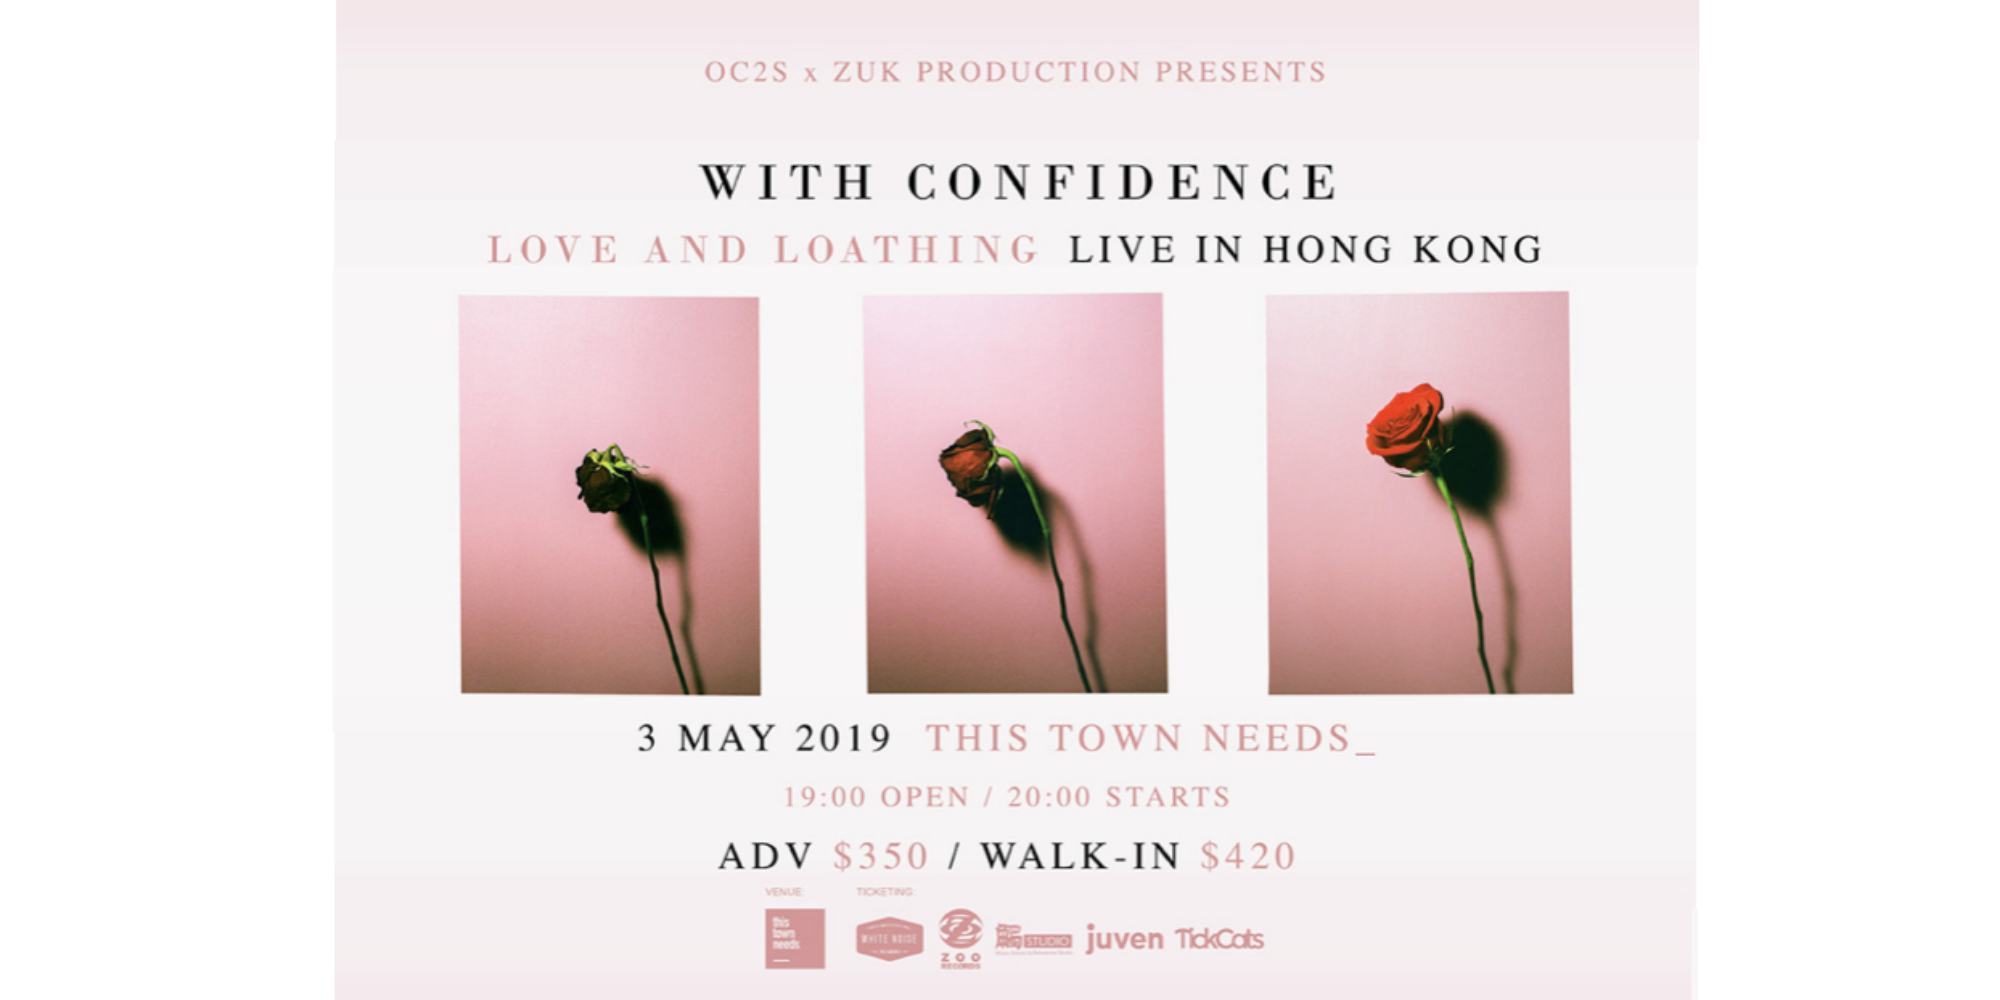 OC2S x Zuk Production Presents: With Confidence - Live in Hong Kong